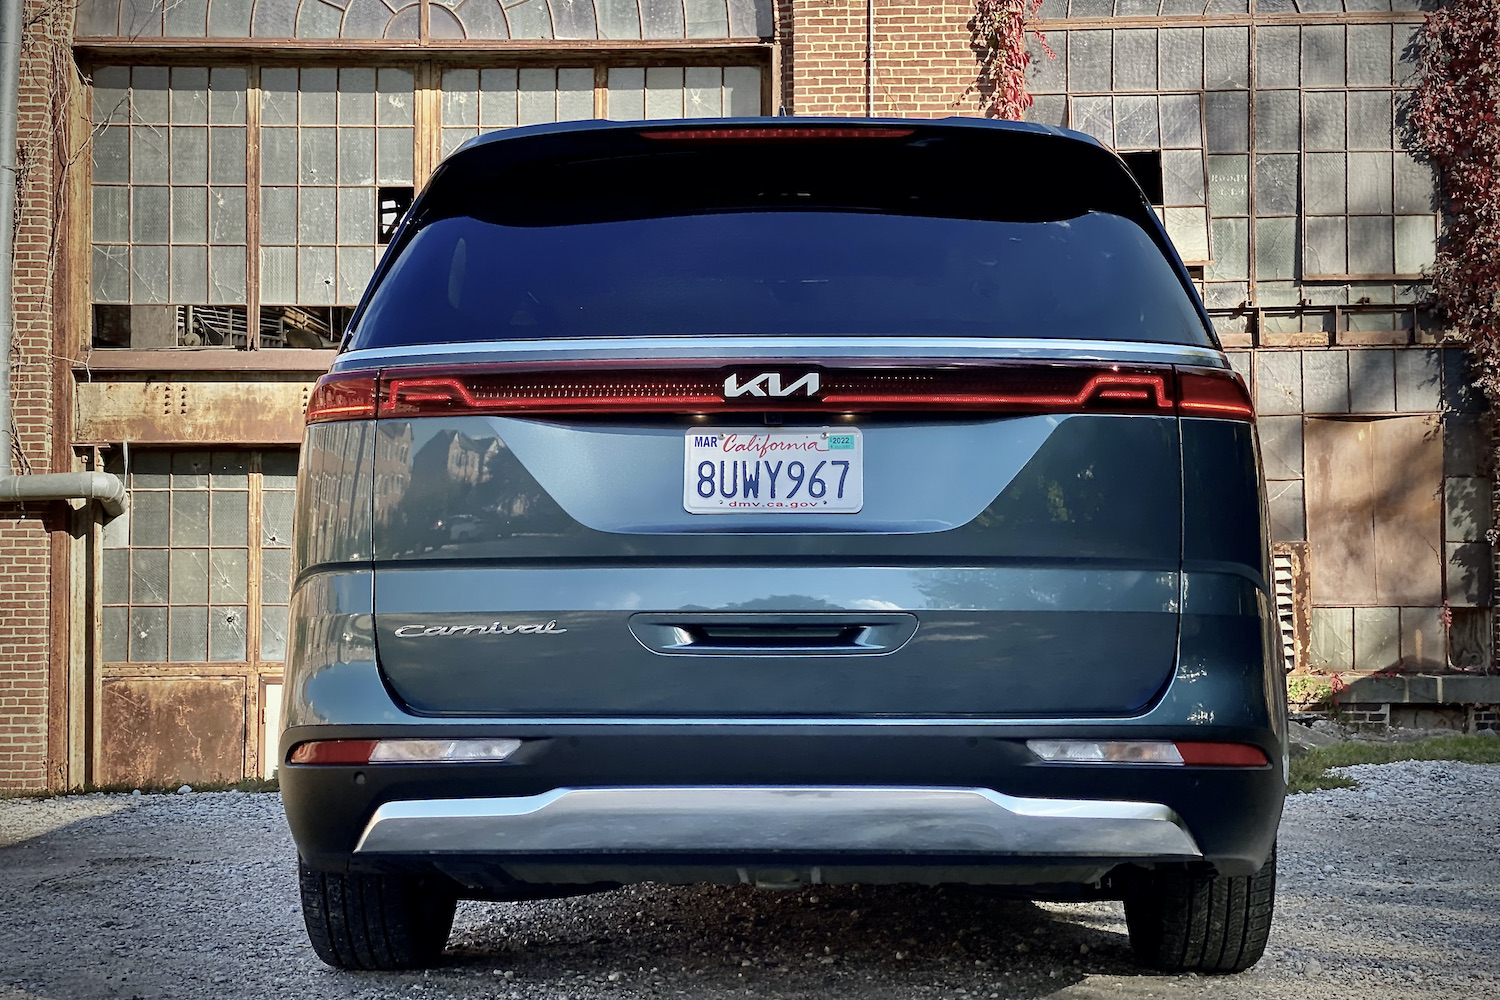 Kia Carnival rear end in front of old building.